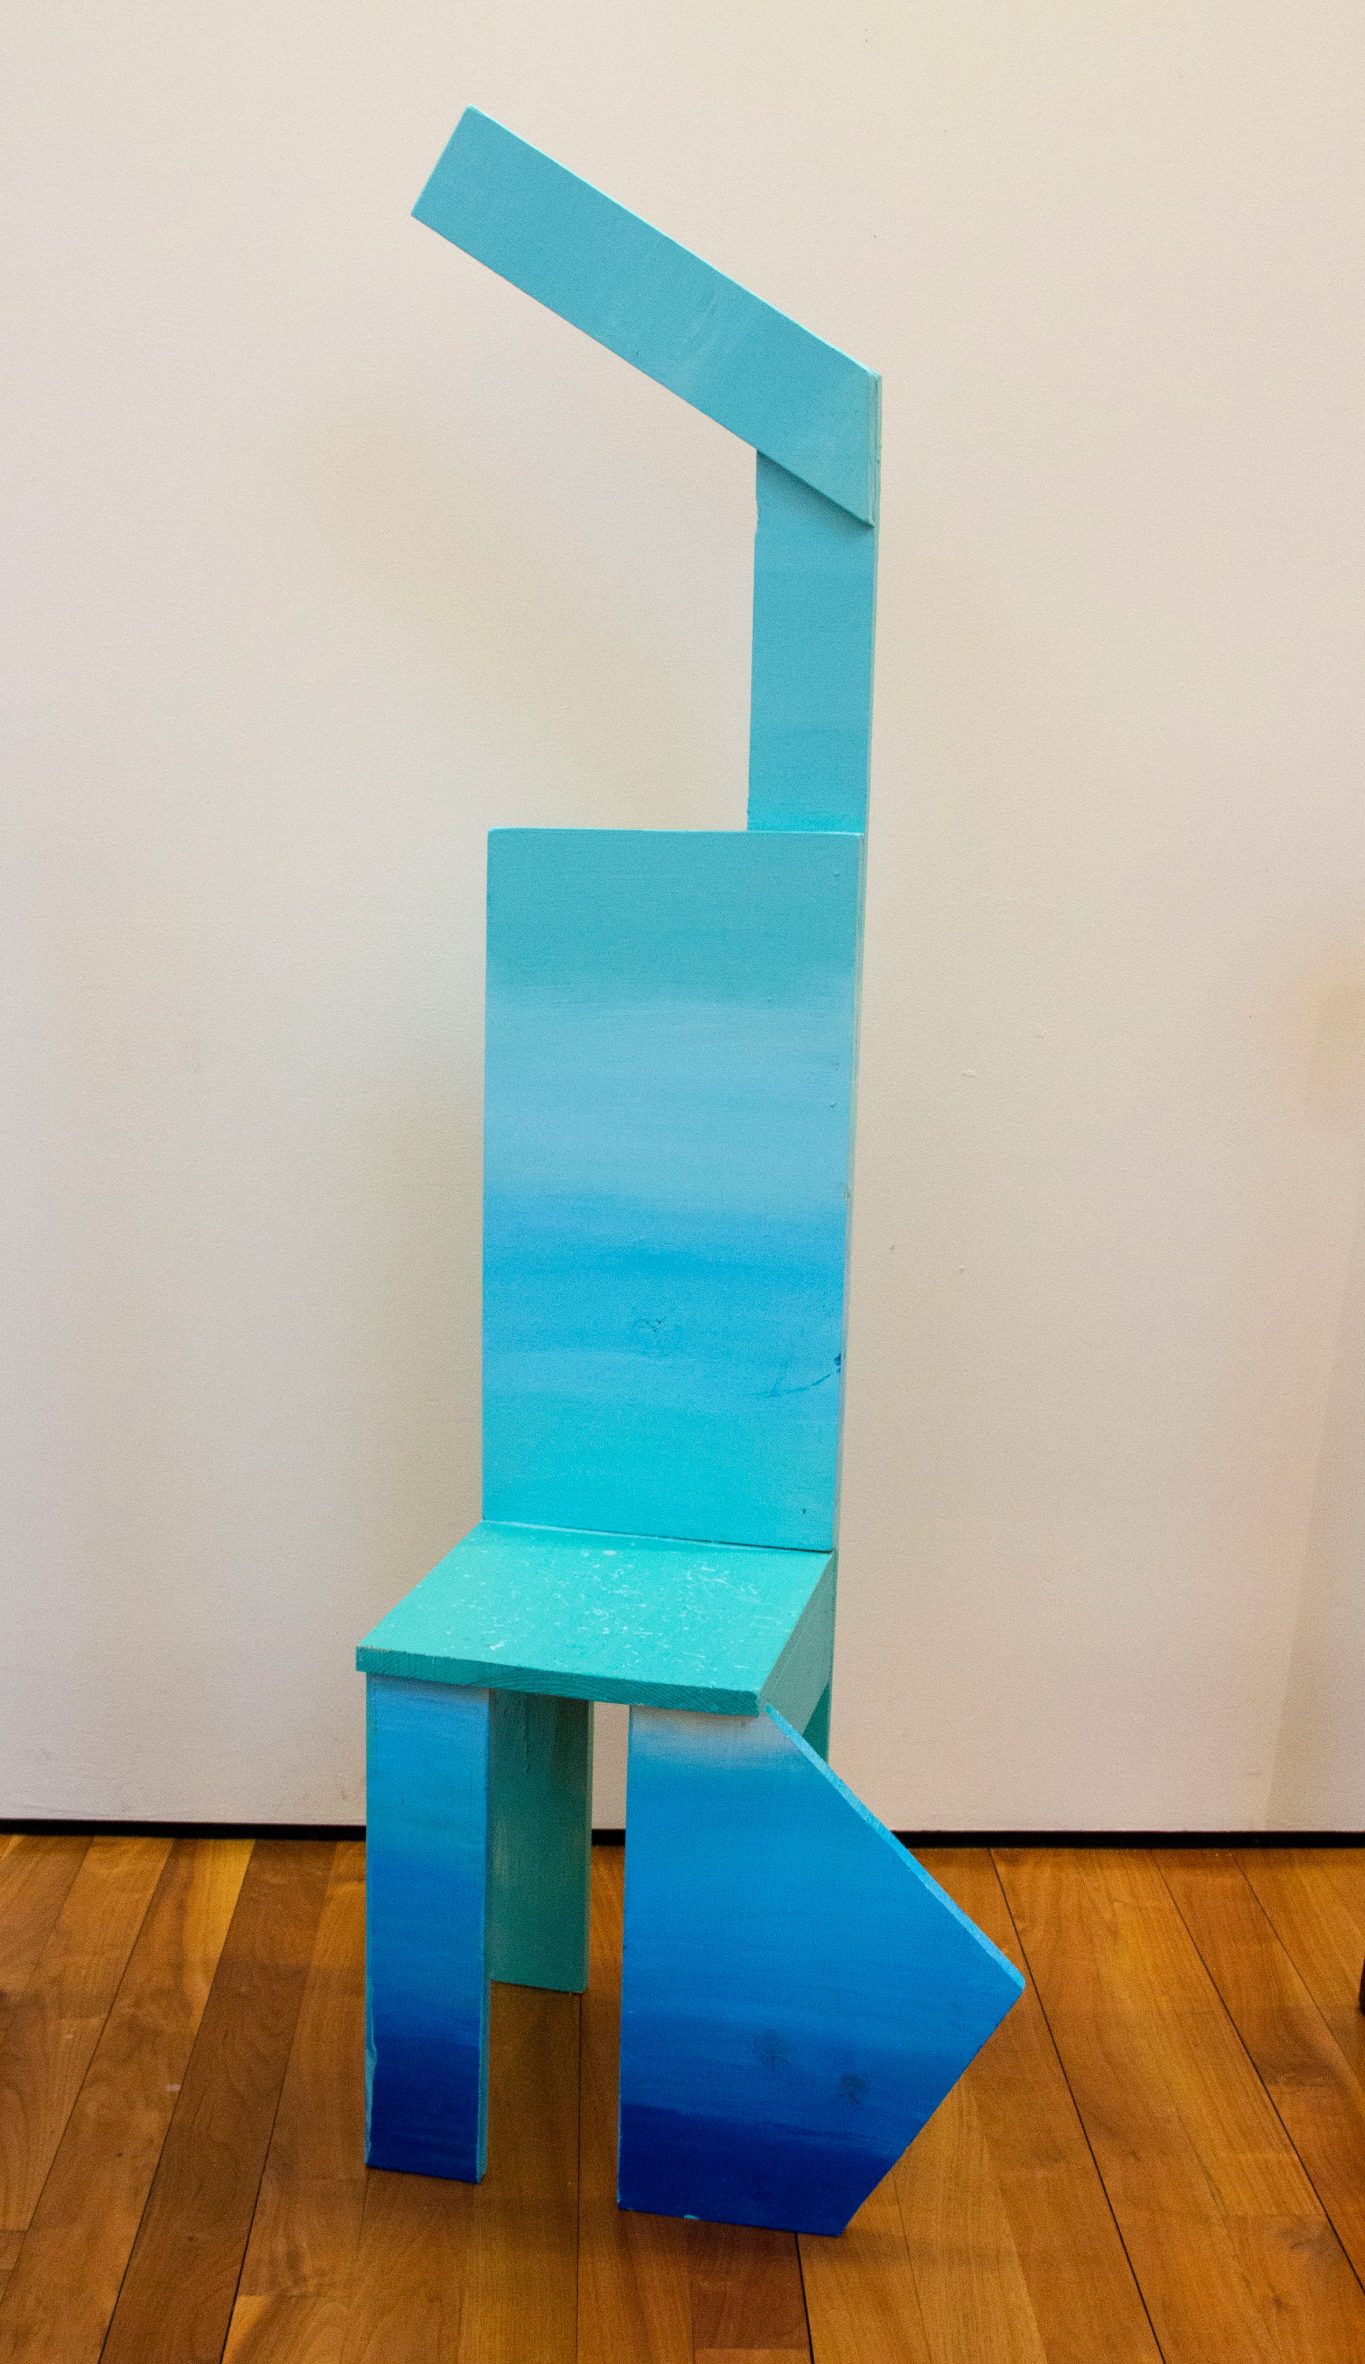 Abstract ballet-inspired chair featuring one arm raised overhead and one triangle leg suggesting a bent leg, all painted ombre blue